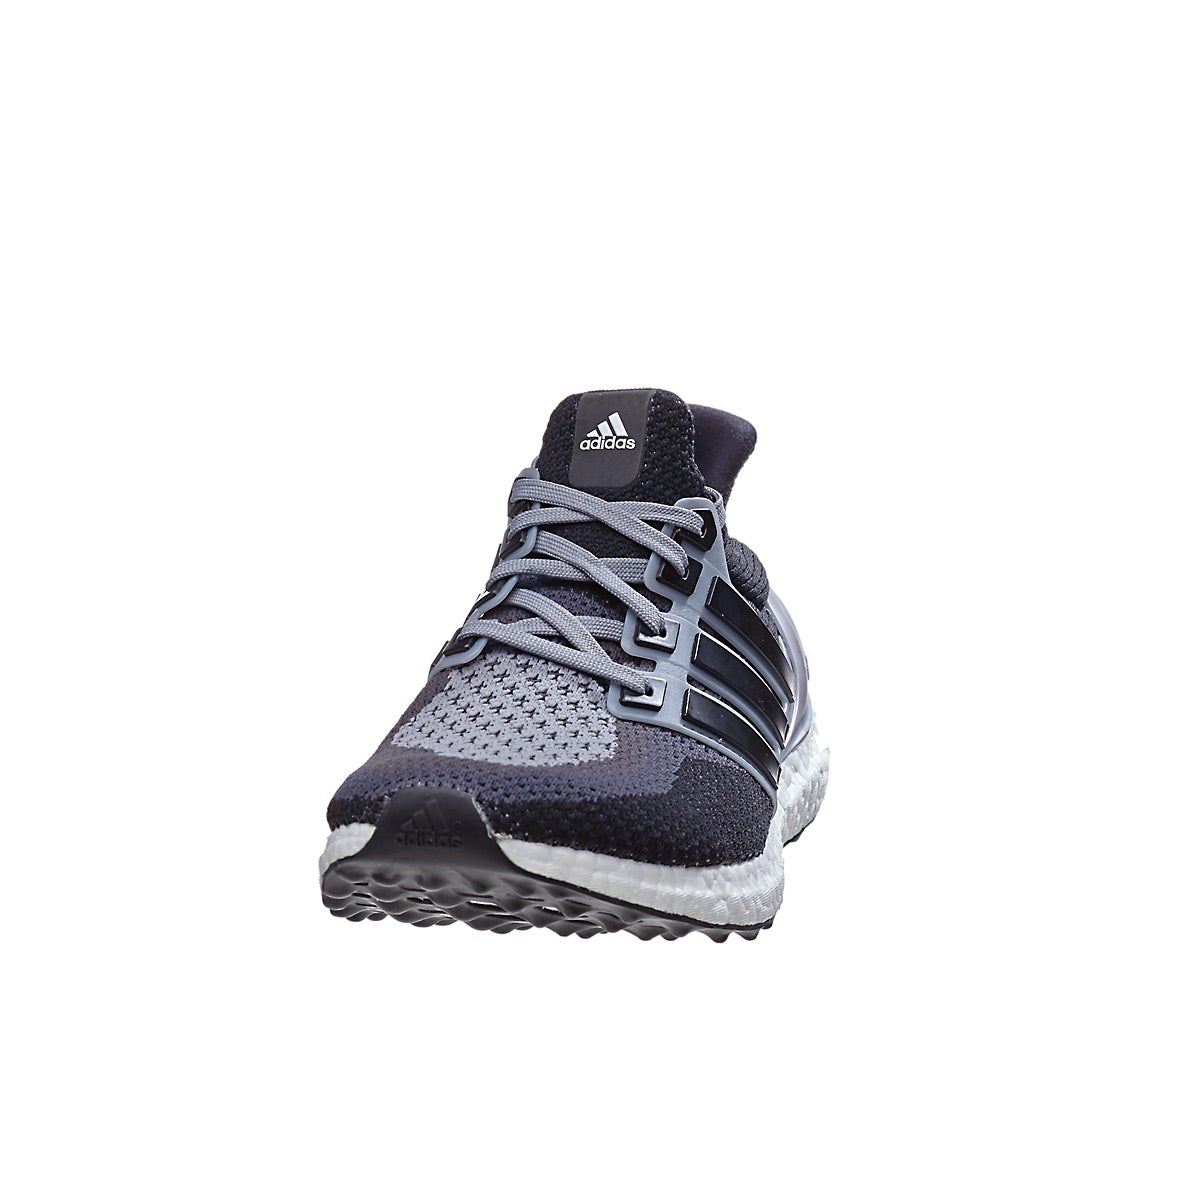 adidas Ultra Boost Men's Shoes Grey 